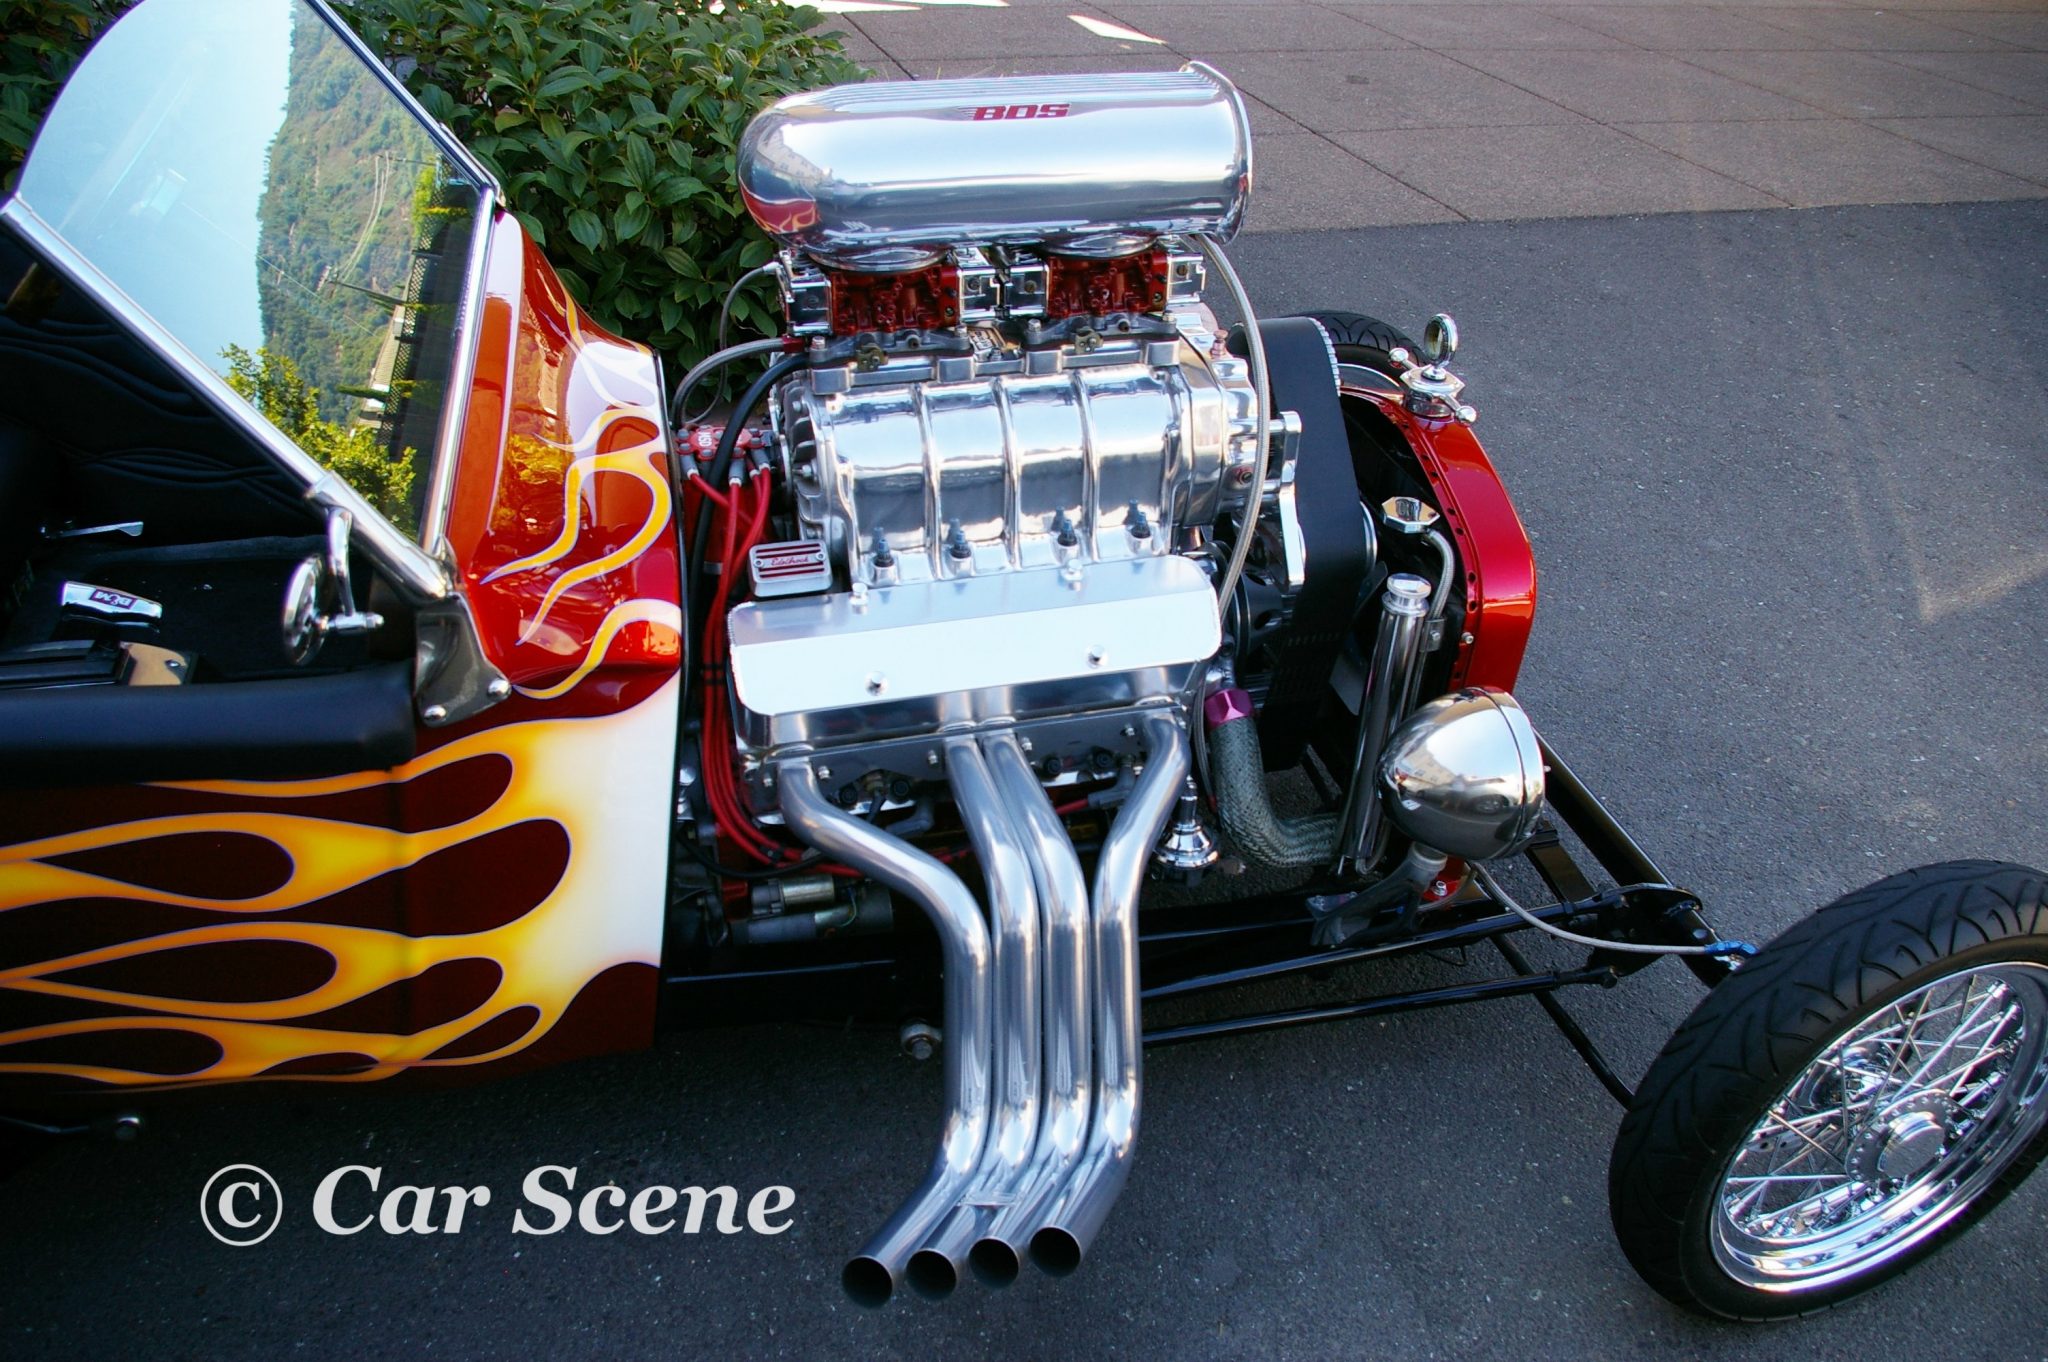 Californian Ford based Hot Rod Engine view